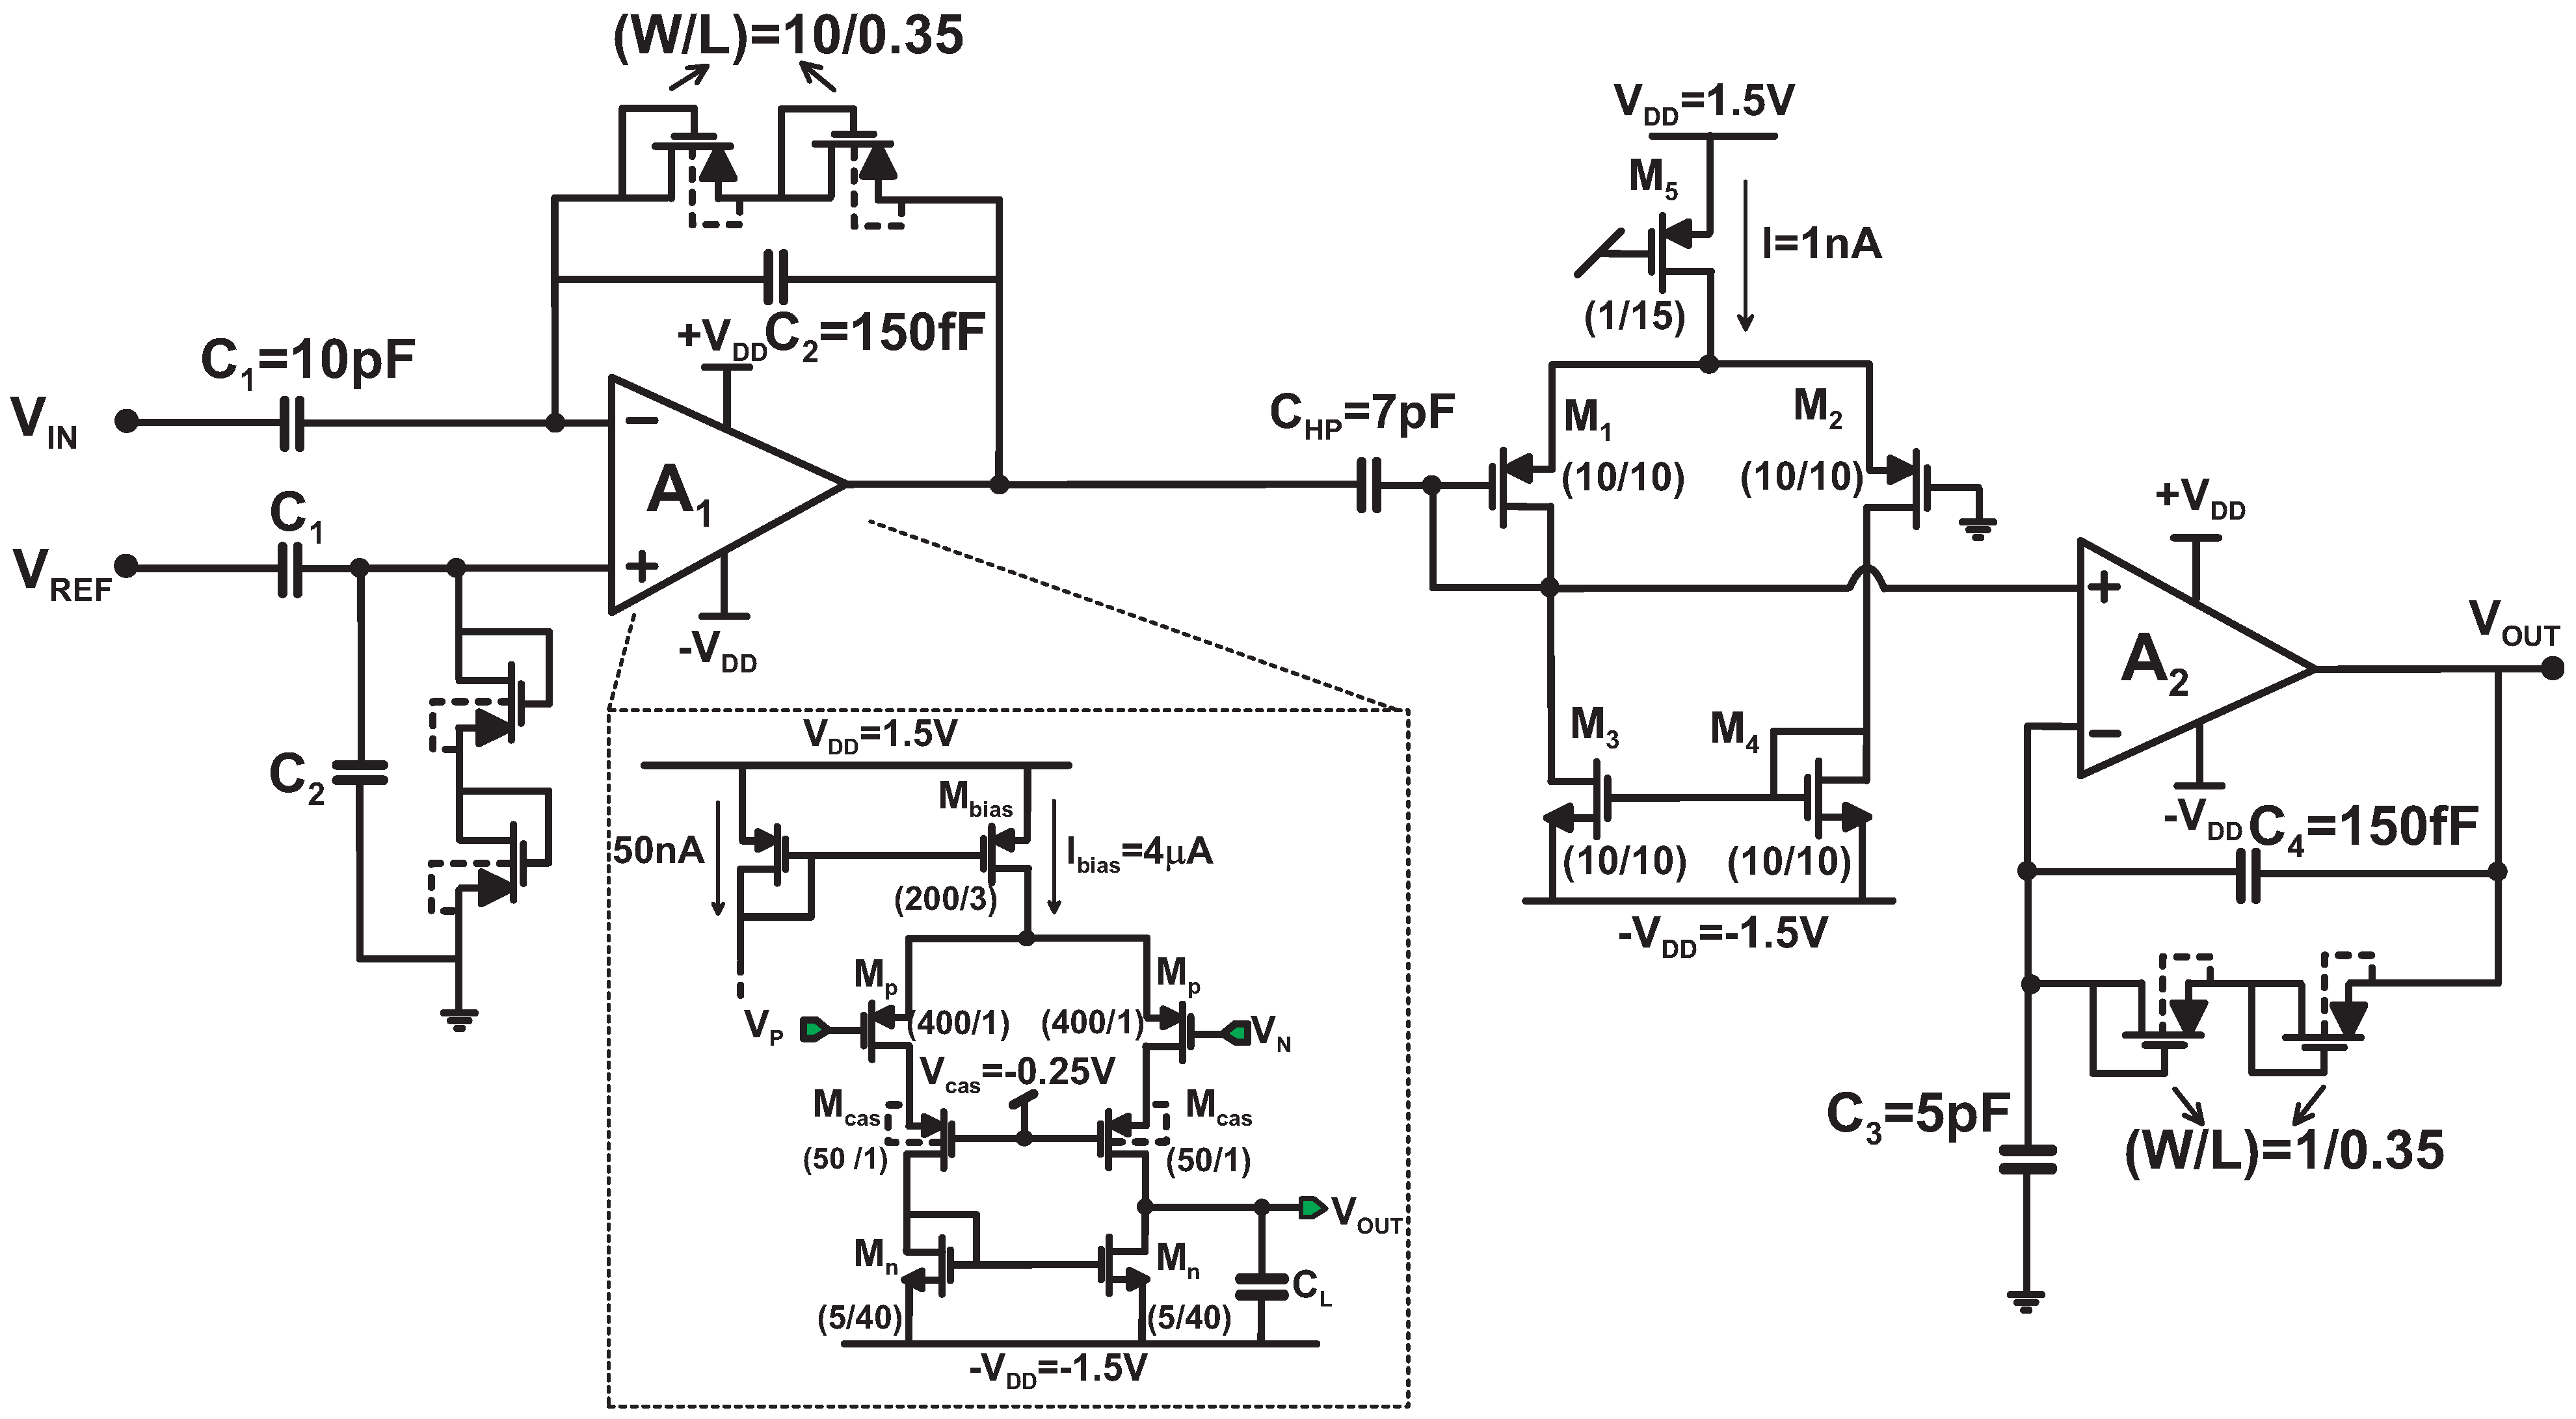 JLPEA | Free Full-Text | A Multi-Channel Low-Power System-on-Chip for